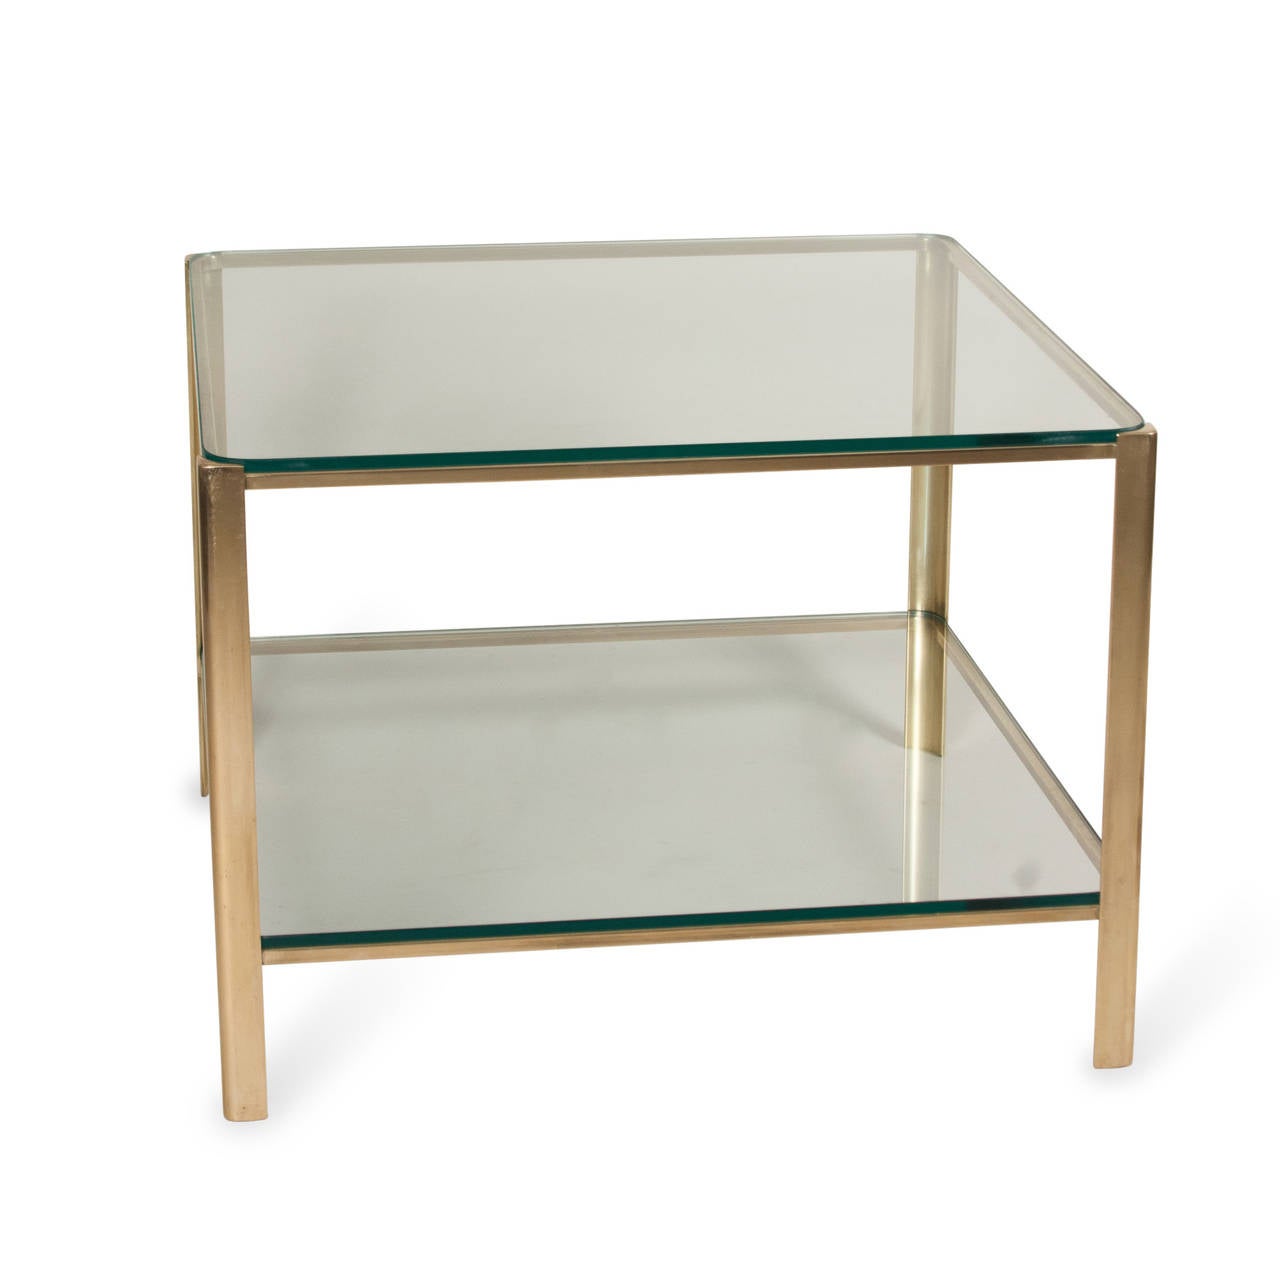 Brass frame square coffee table, glass top with rounded corners, lower glass shelf by Maison Malabert. French, 1940s. Stamped markings to inside edge. Attributed to Jacques Quinet. Measures: 24 in square, height 17 in.